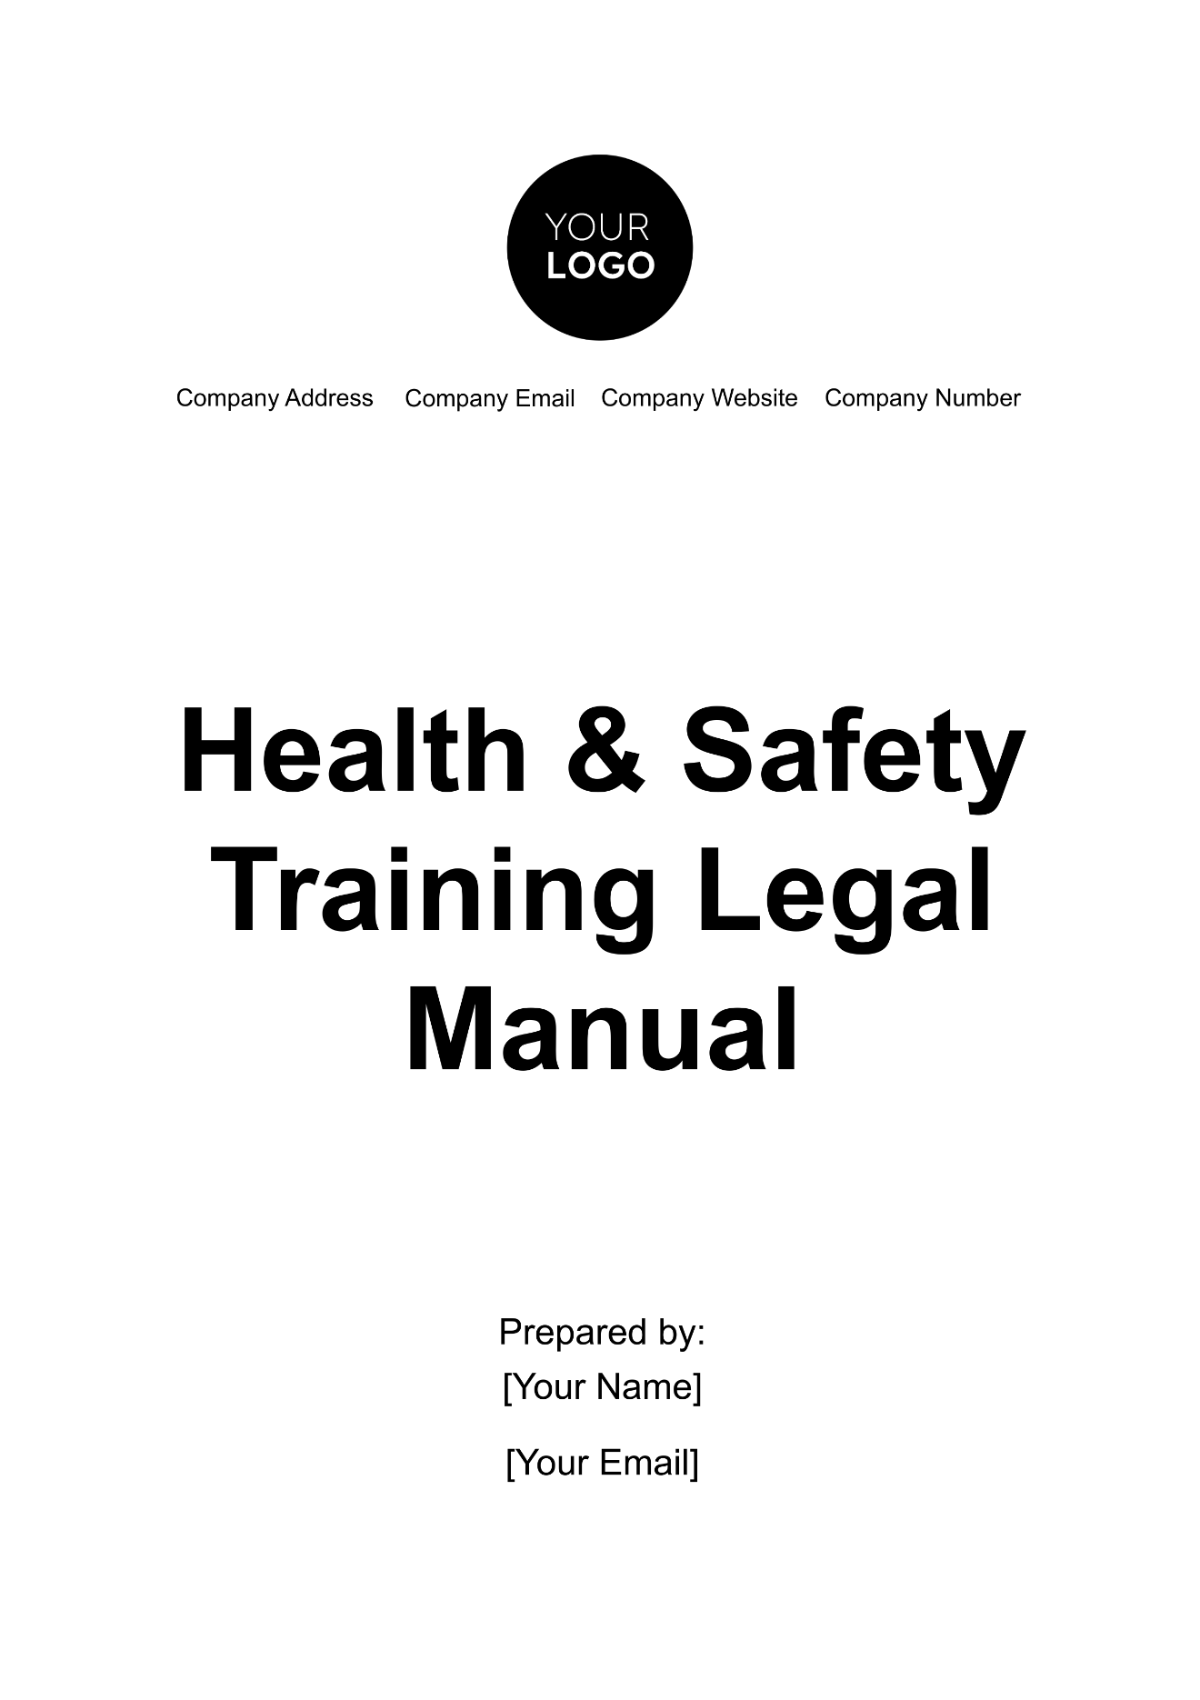 Free Health & Safety Training Legal Manual Template